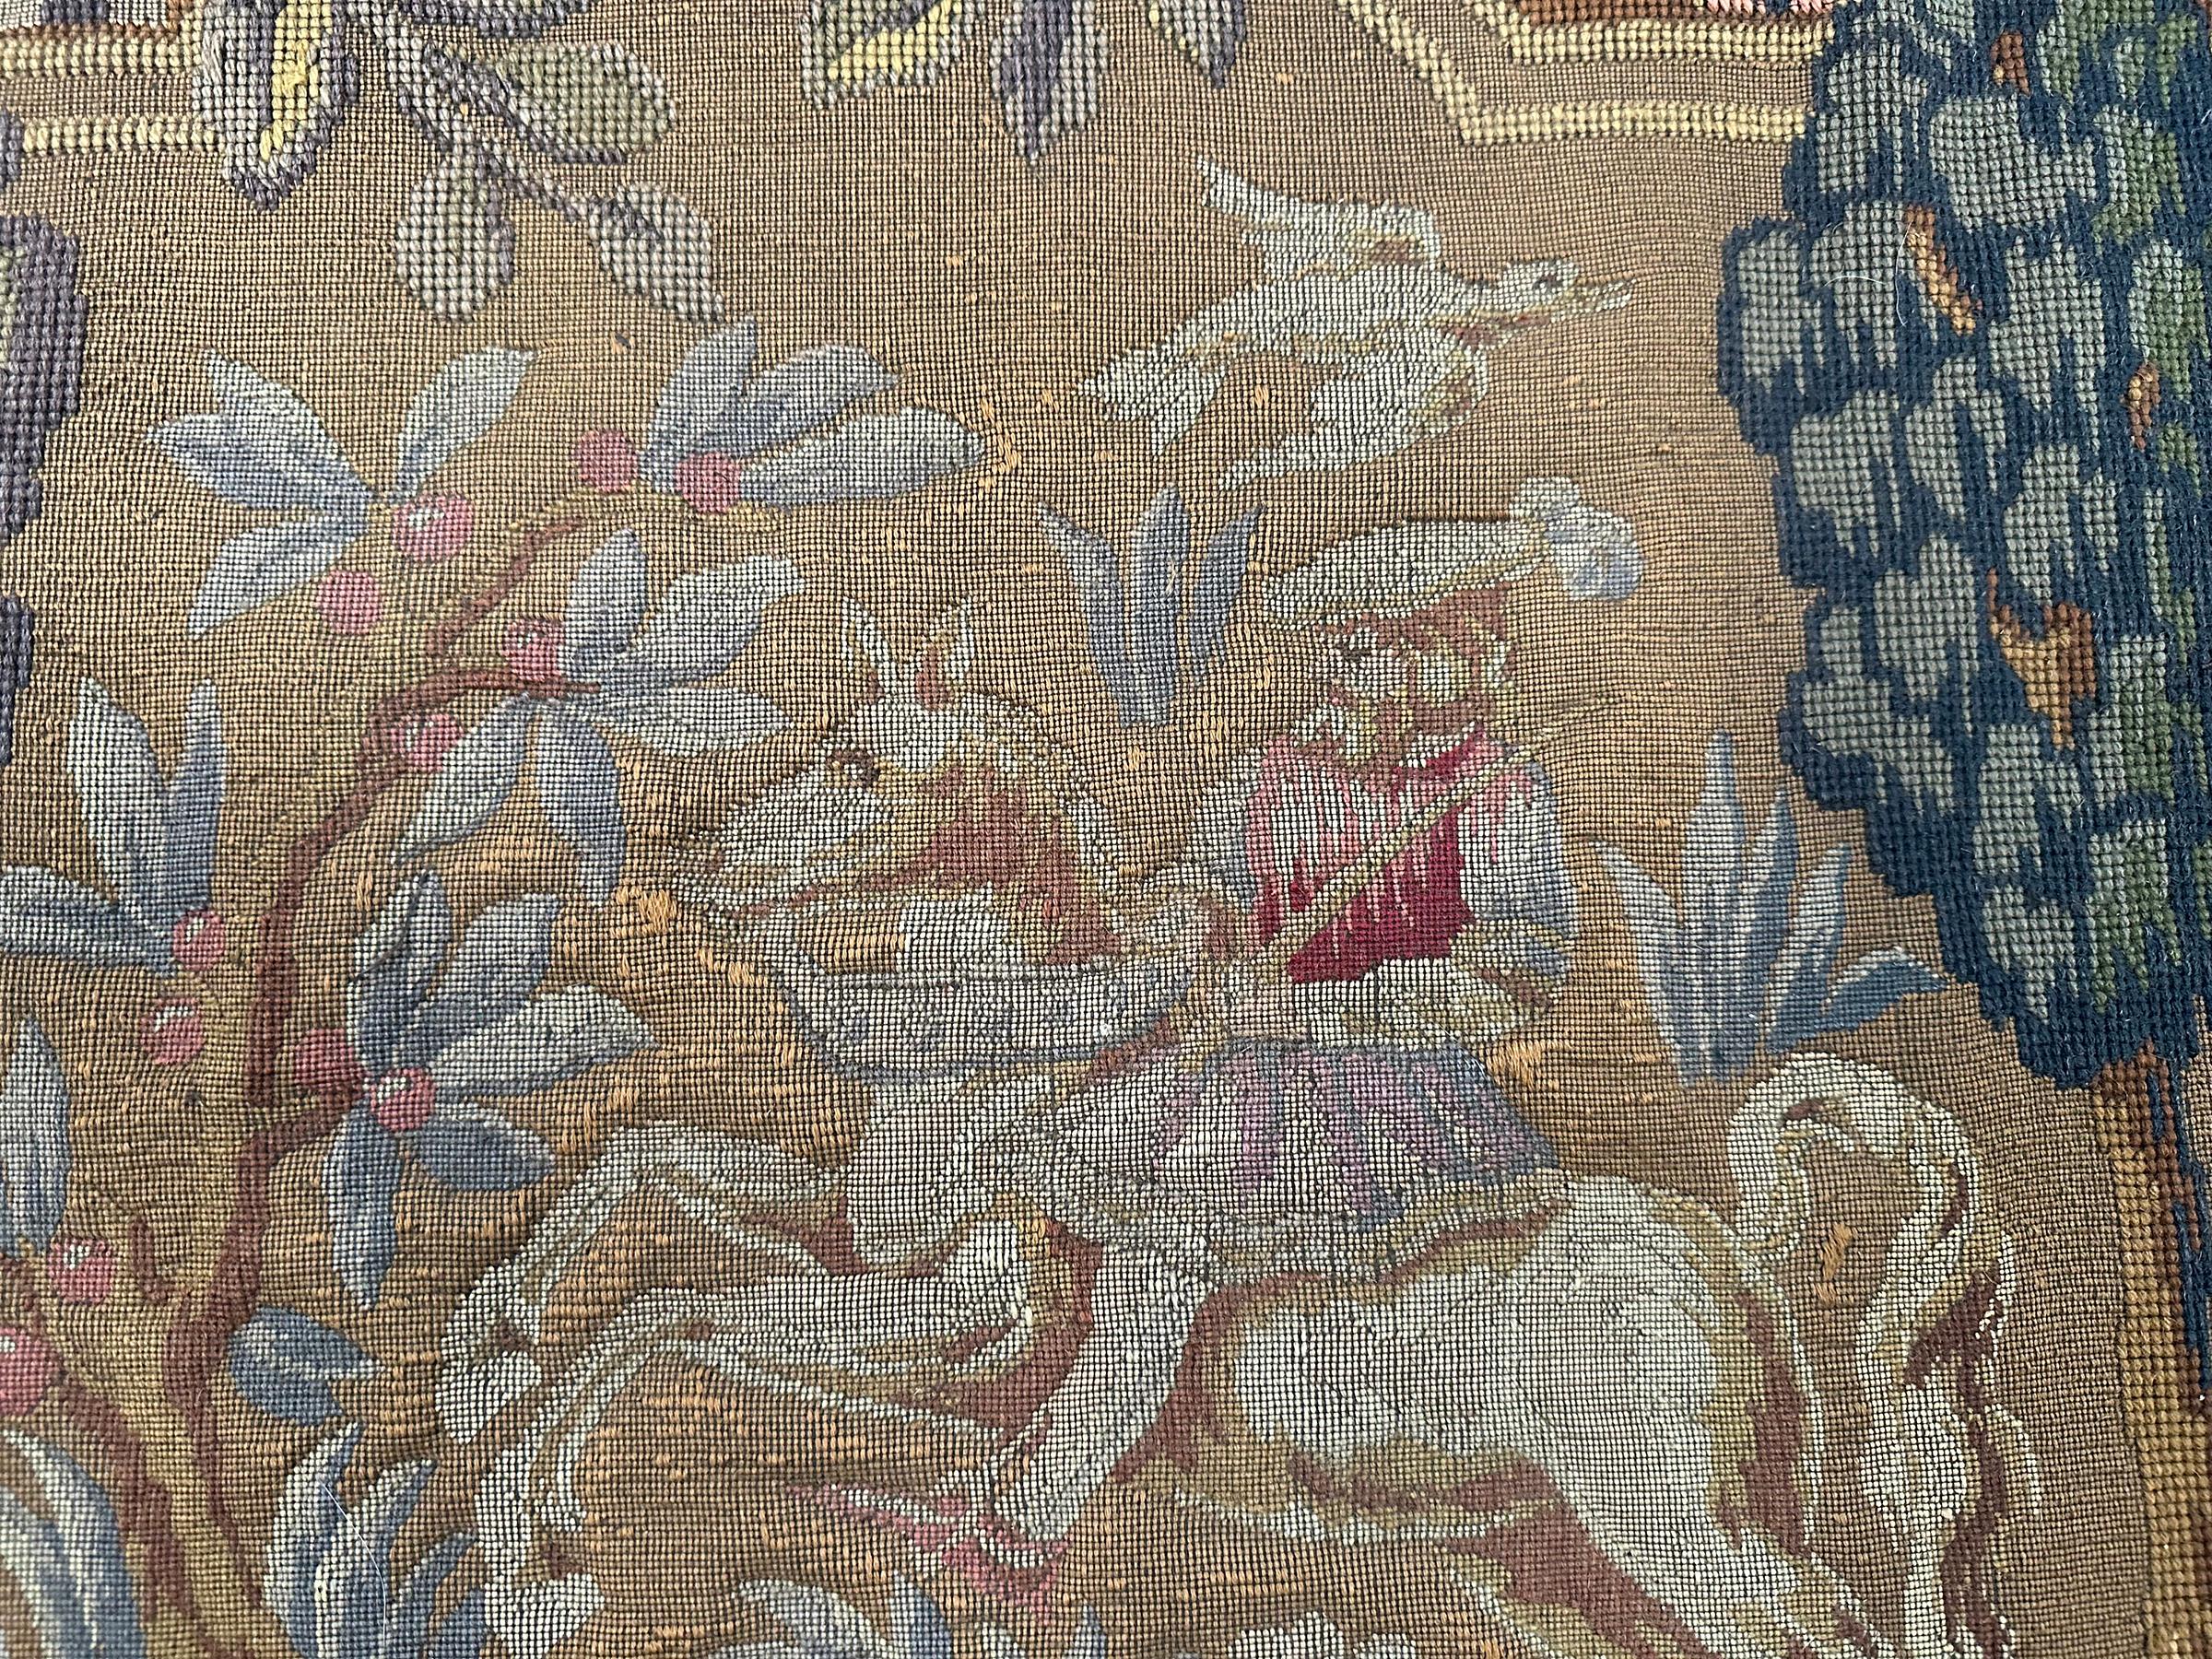 1920 Antique English Needlepoint Tapestry Wool & Silk 3x5 82cm x 158cm For Sale 4